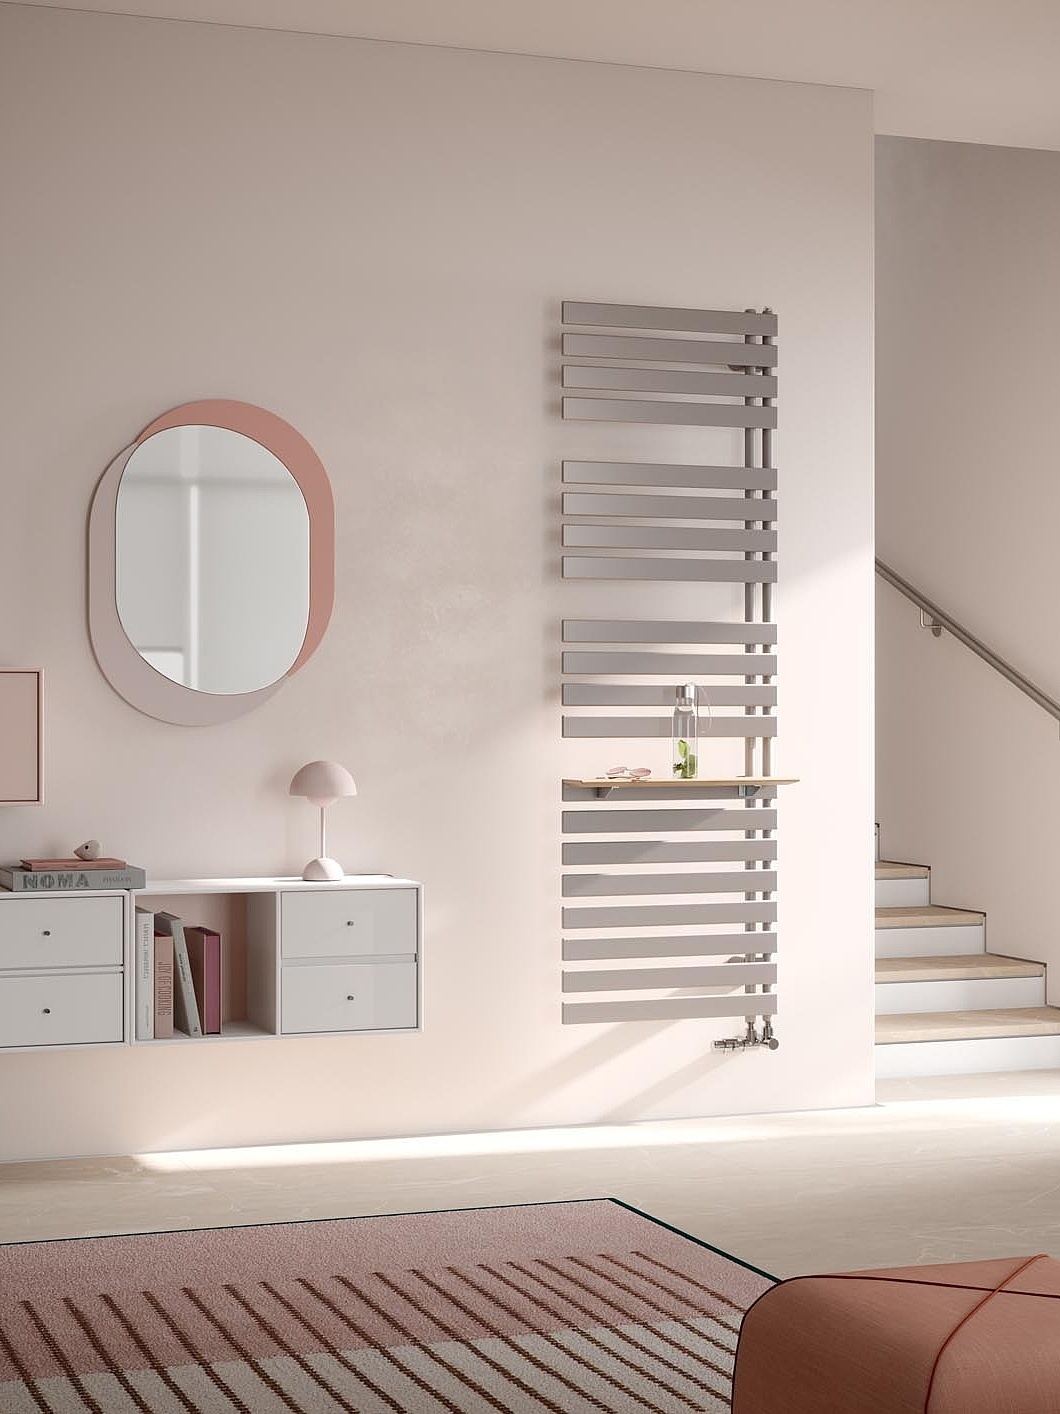 The Kermi Credo Half flat design and bathroom radiator blends perfectly into the living space in accordance with the colour scheme.